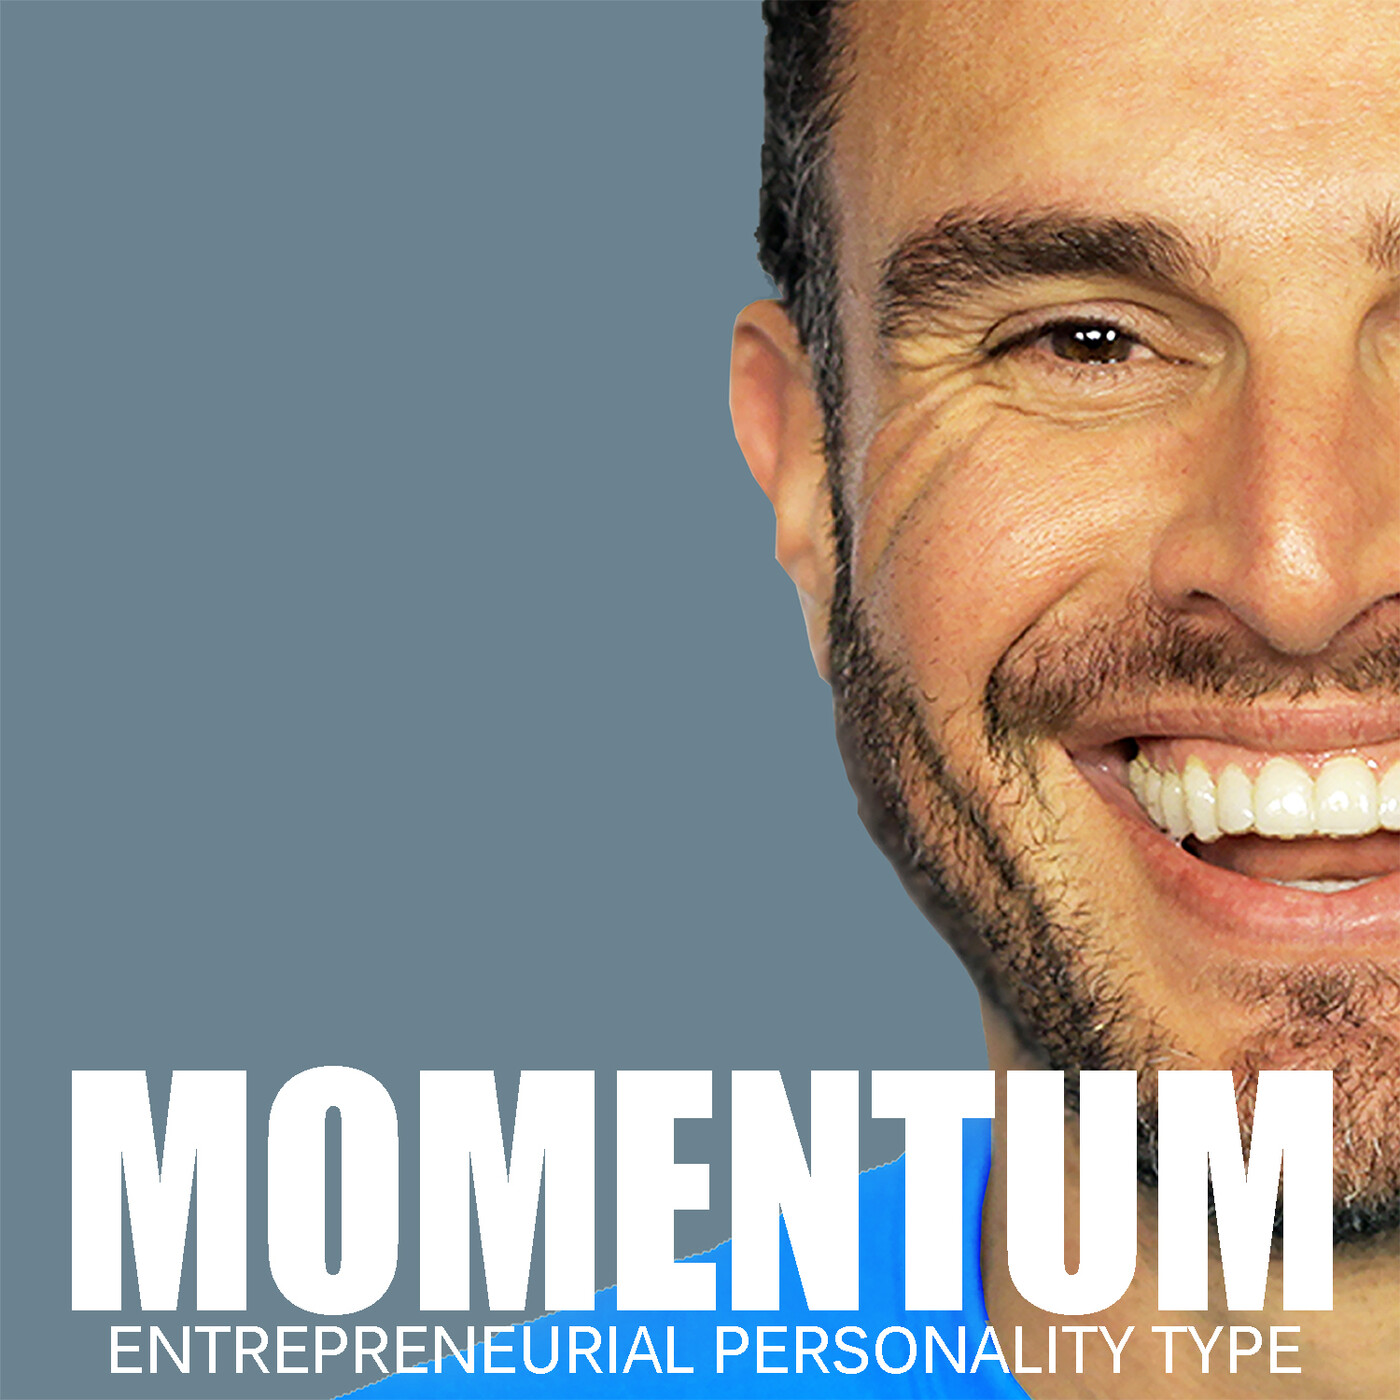 The Primal Walk A Simple Habit That Changes Everything Entrepreneurial Personality Type EPT 